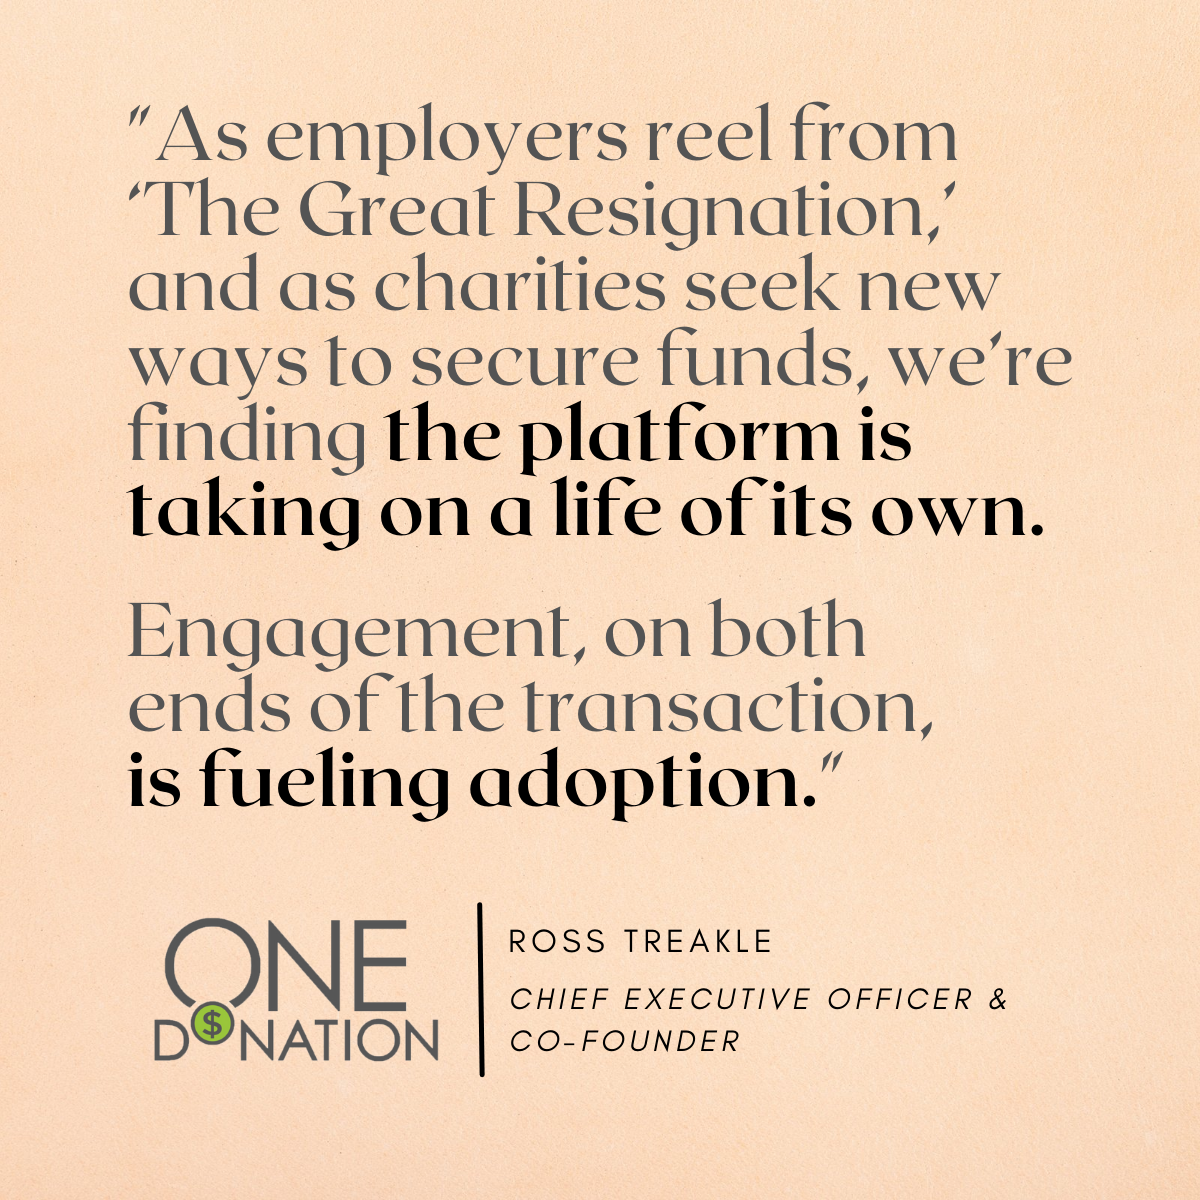 "As employers reel from 'The Great Resignation', and as charities seek new ways to secure funds, we're finding the platform is taking on a life of its own.  Engagement, on both ends of the transaction, is fueling adoption." - Ross Treakle, Chief Executive Officer & Co-Founder